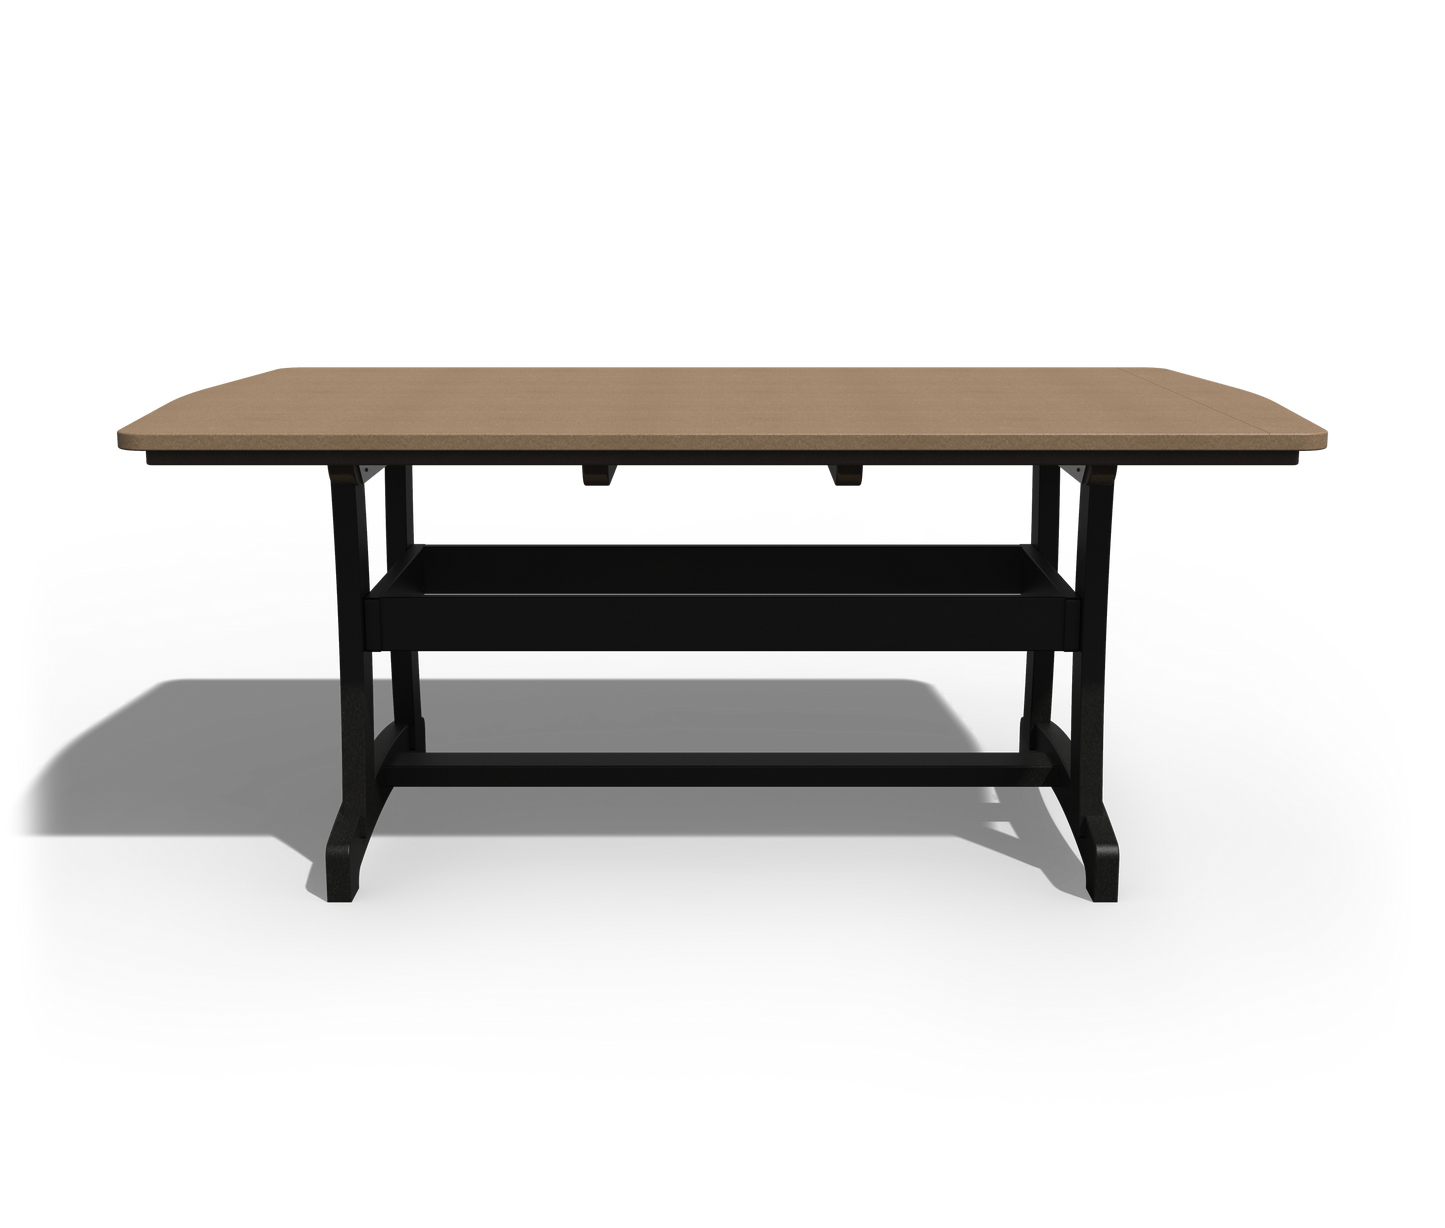 Patiova Recycled Plastic 4'x6' Legacy Dining Table - LEAD TIME TO SHIP 3 WEEKS